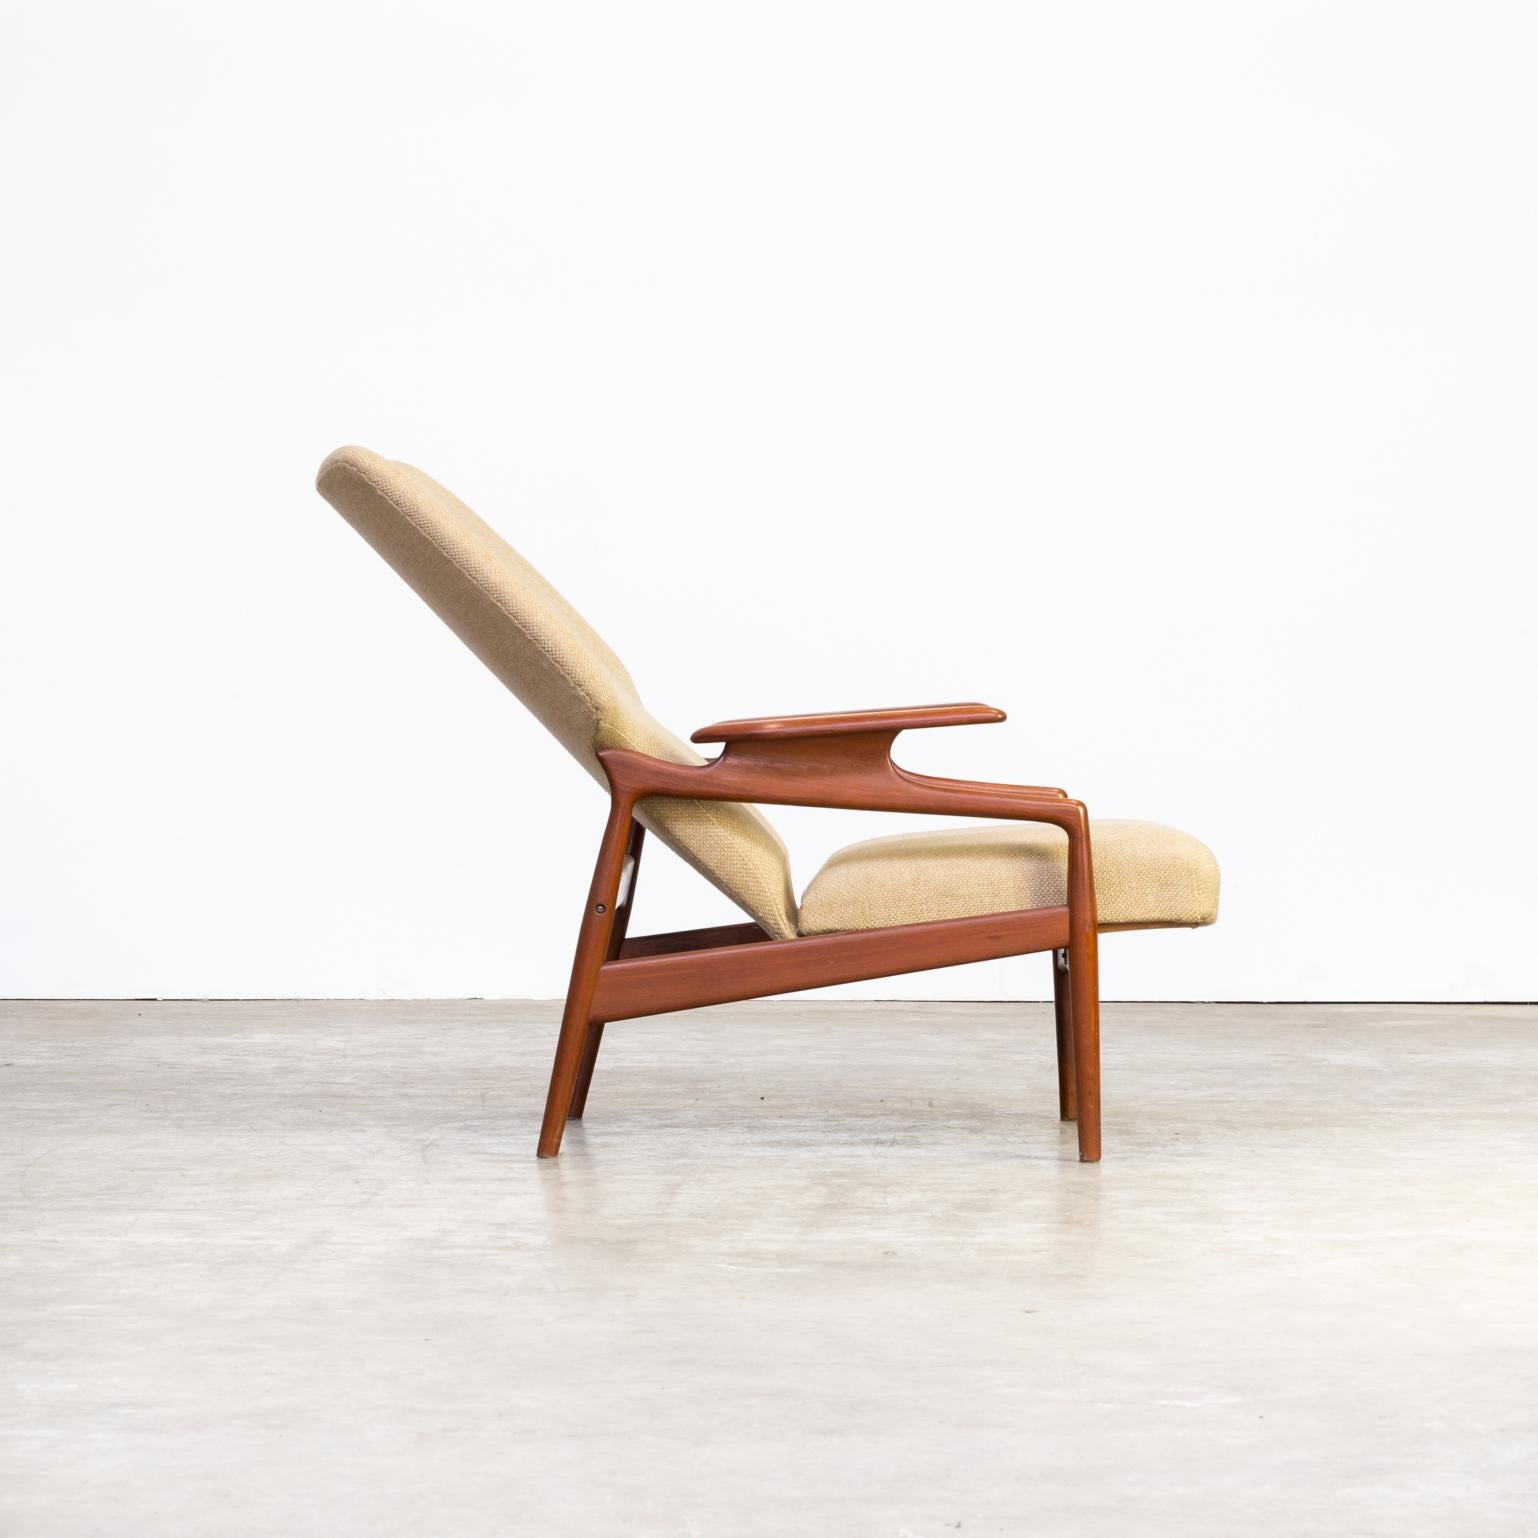 1960s John Boné Teak and Wool Adjustable Lounge Chair for Advance Design In Good Condition For Sale In Amstelveen, Noord